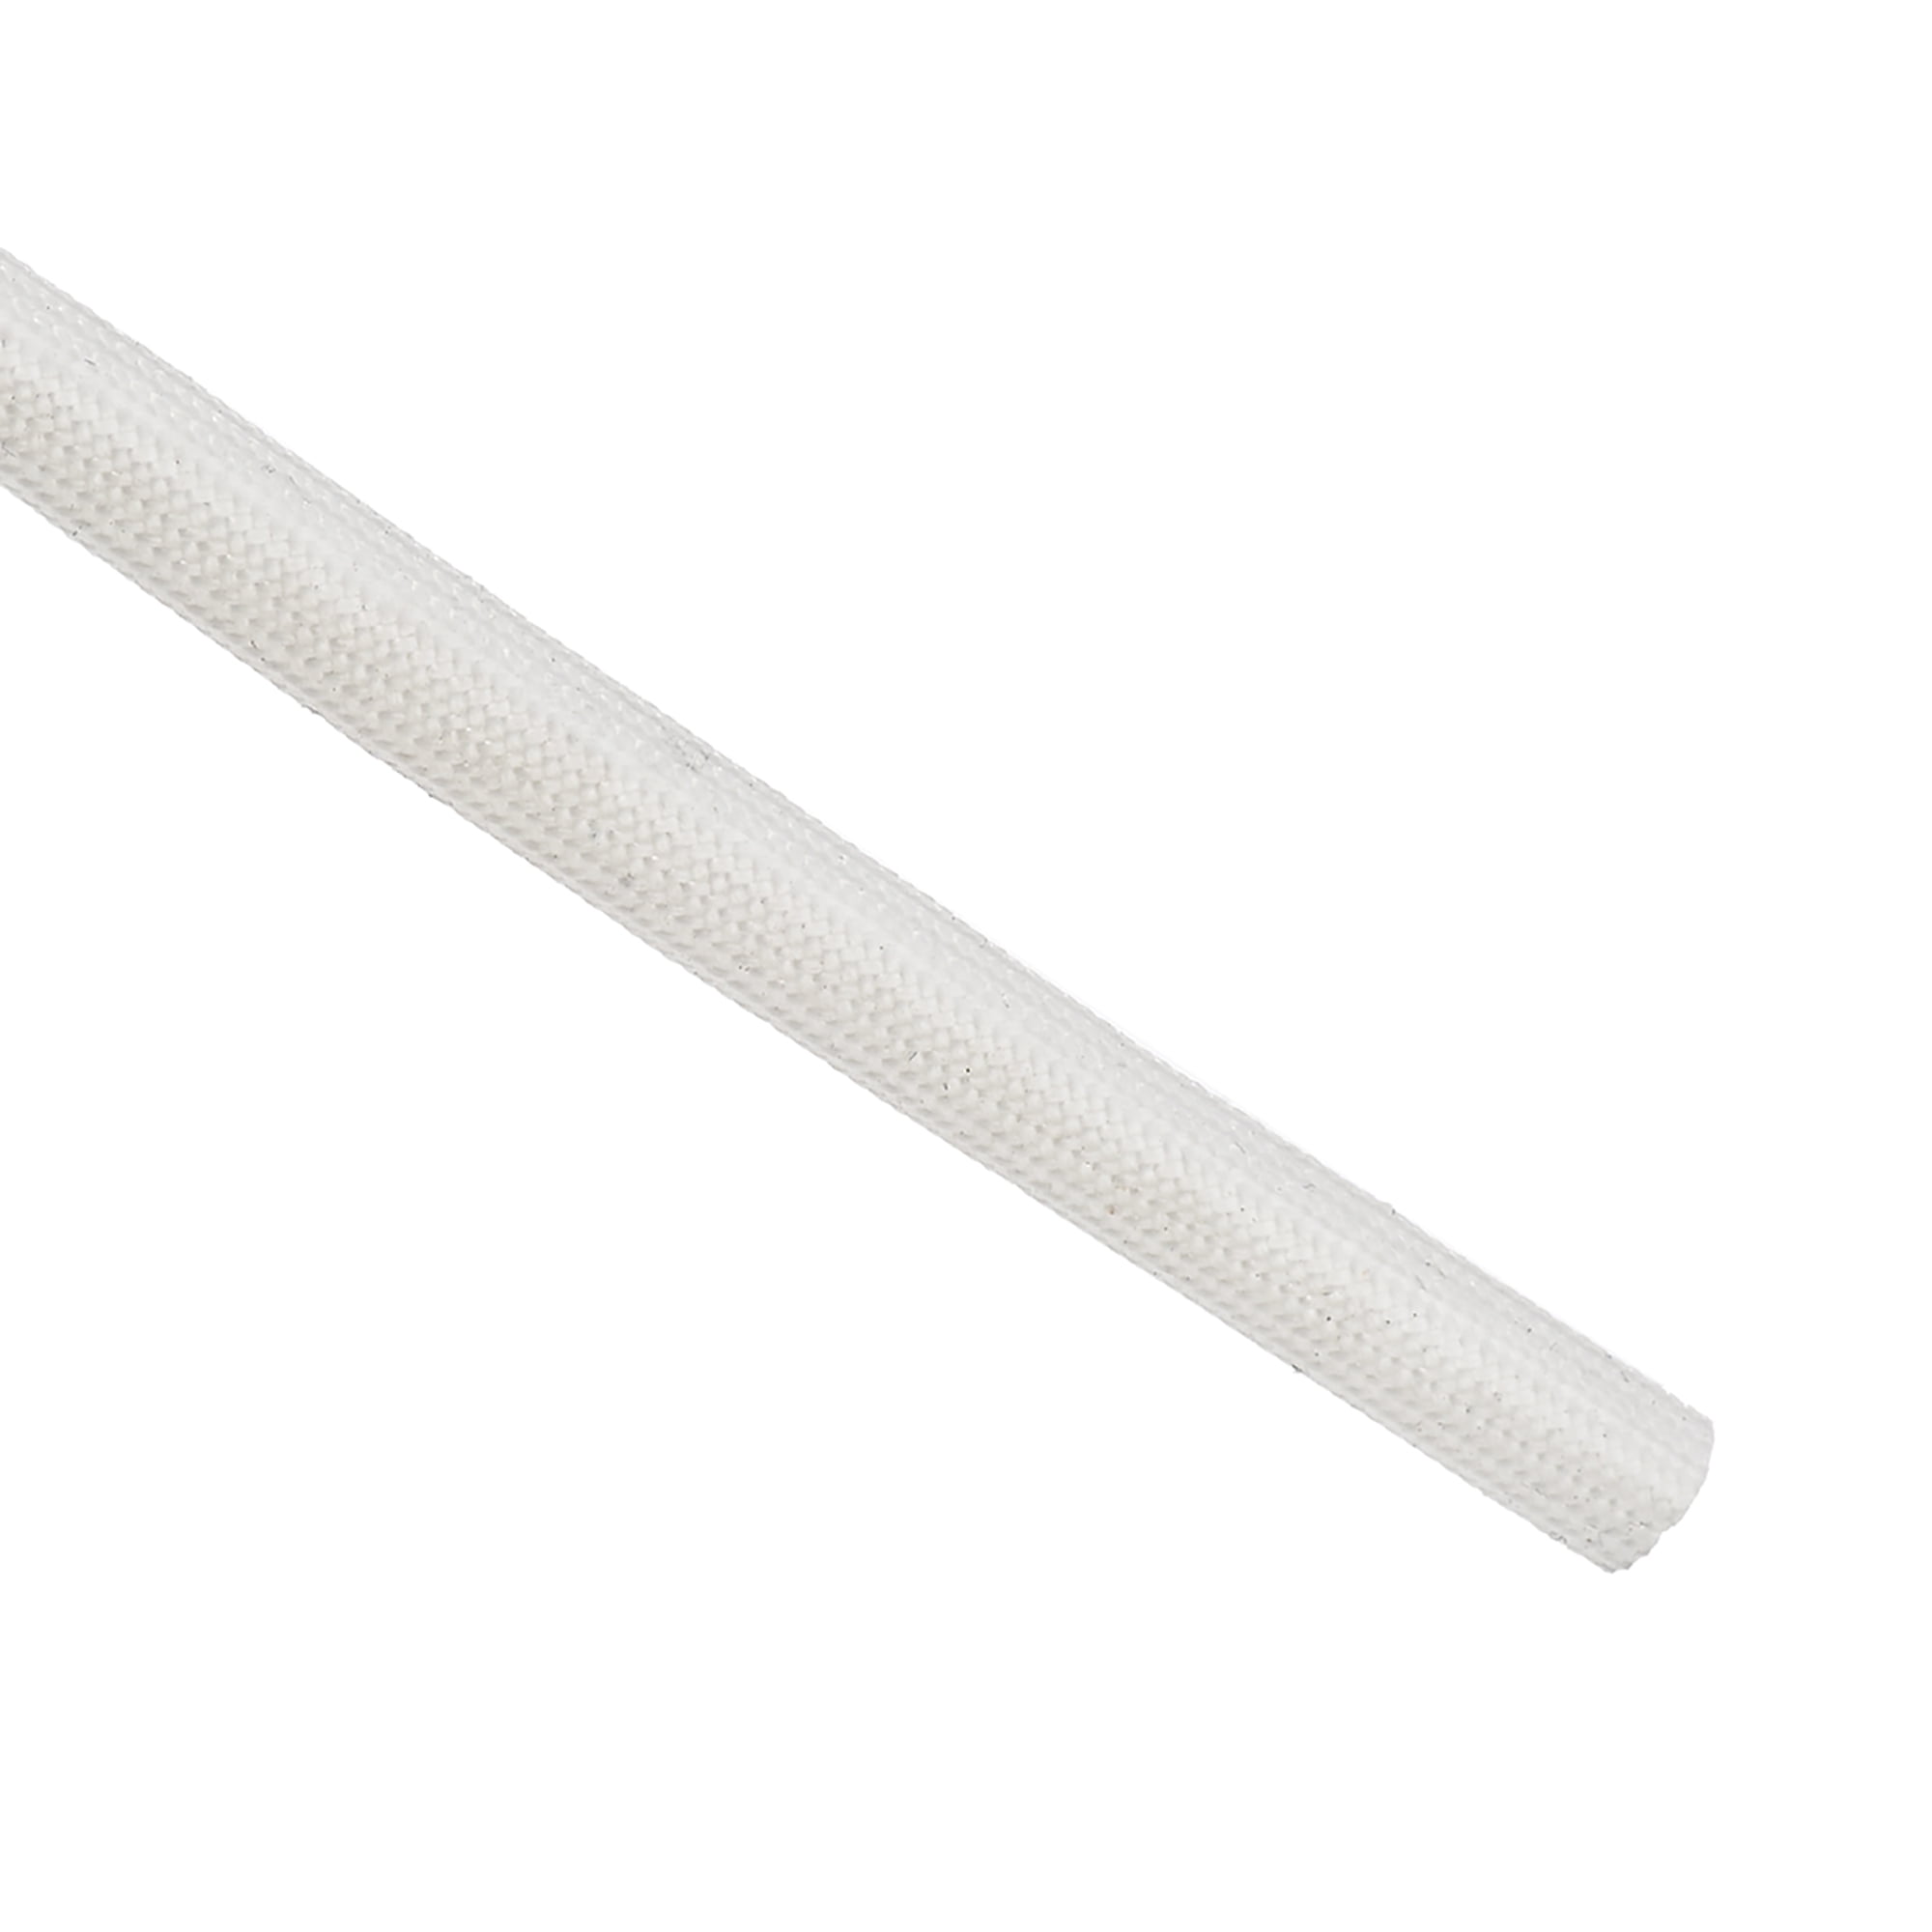 Insulation Cable Protector,16.4Ft-8mm High TEMP Silicone Fiberglass Sleeve White 